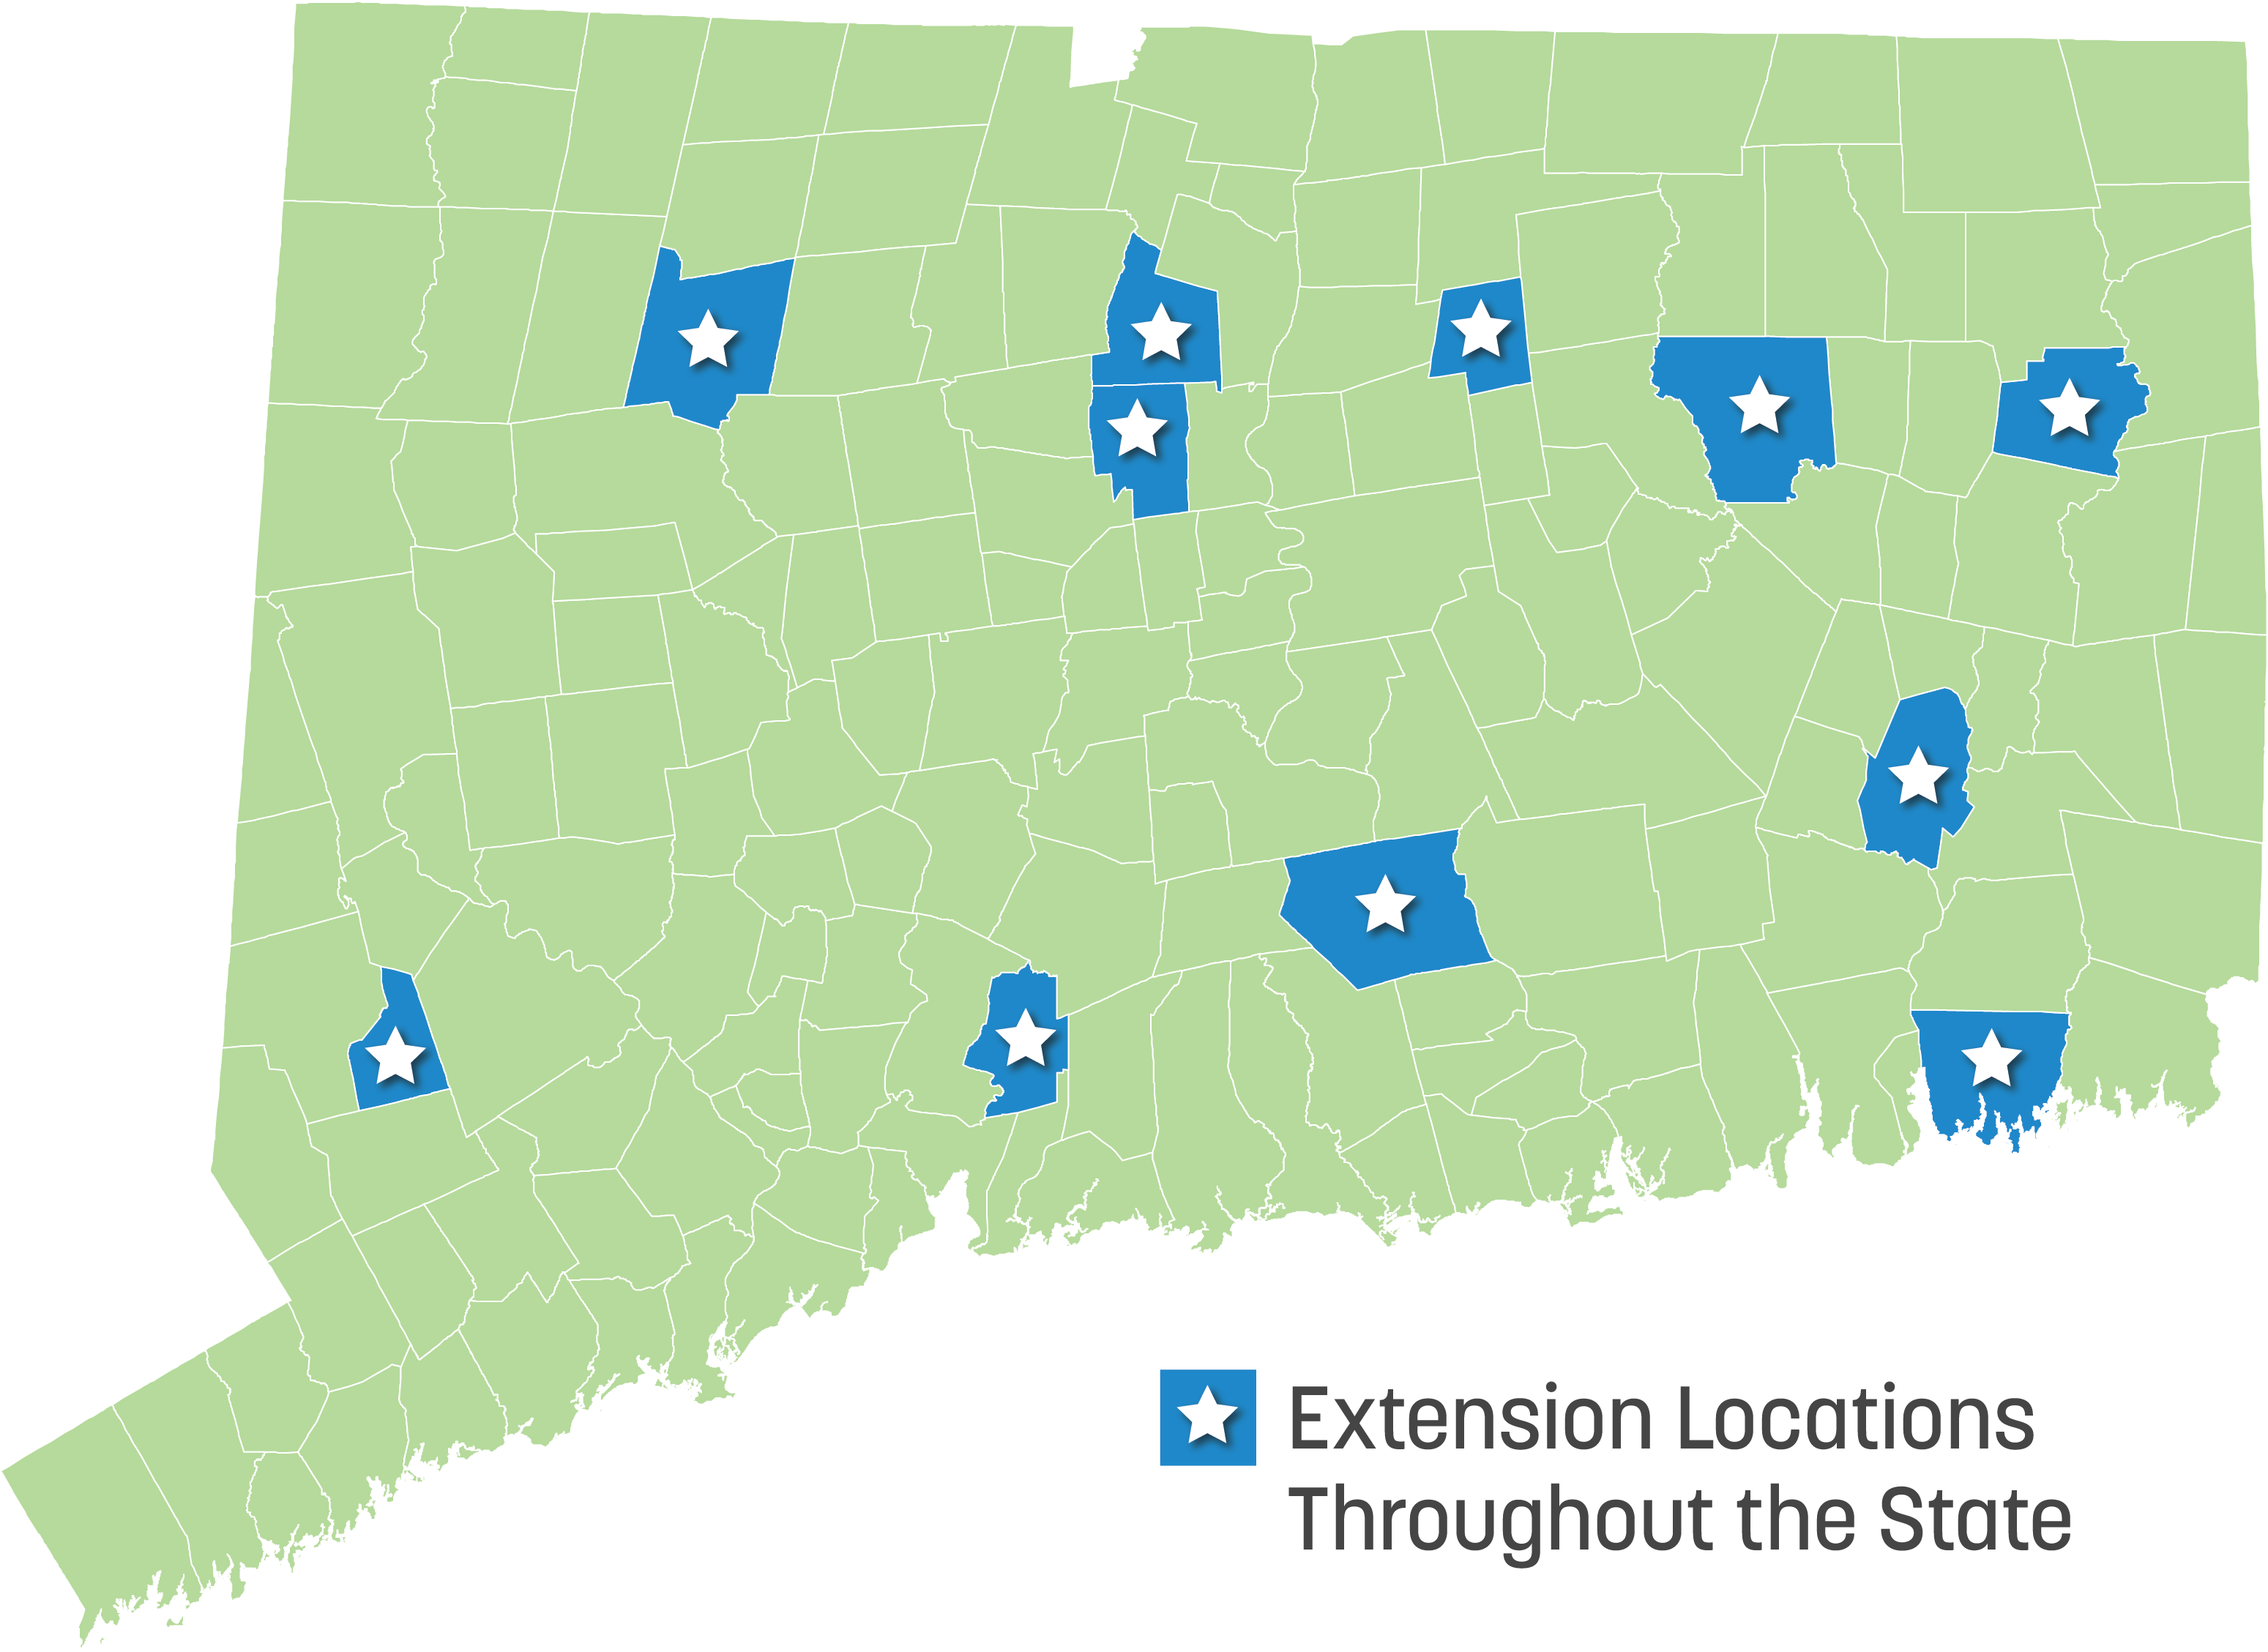 map of Connecticut with star locations of Extension centers